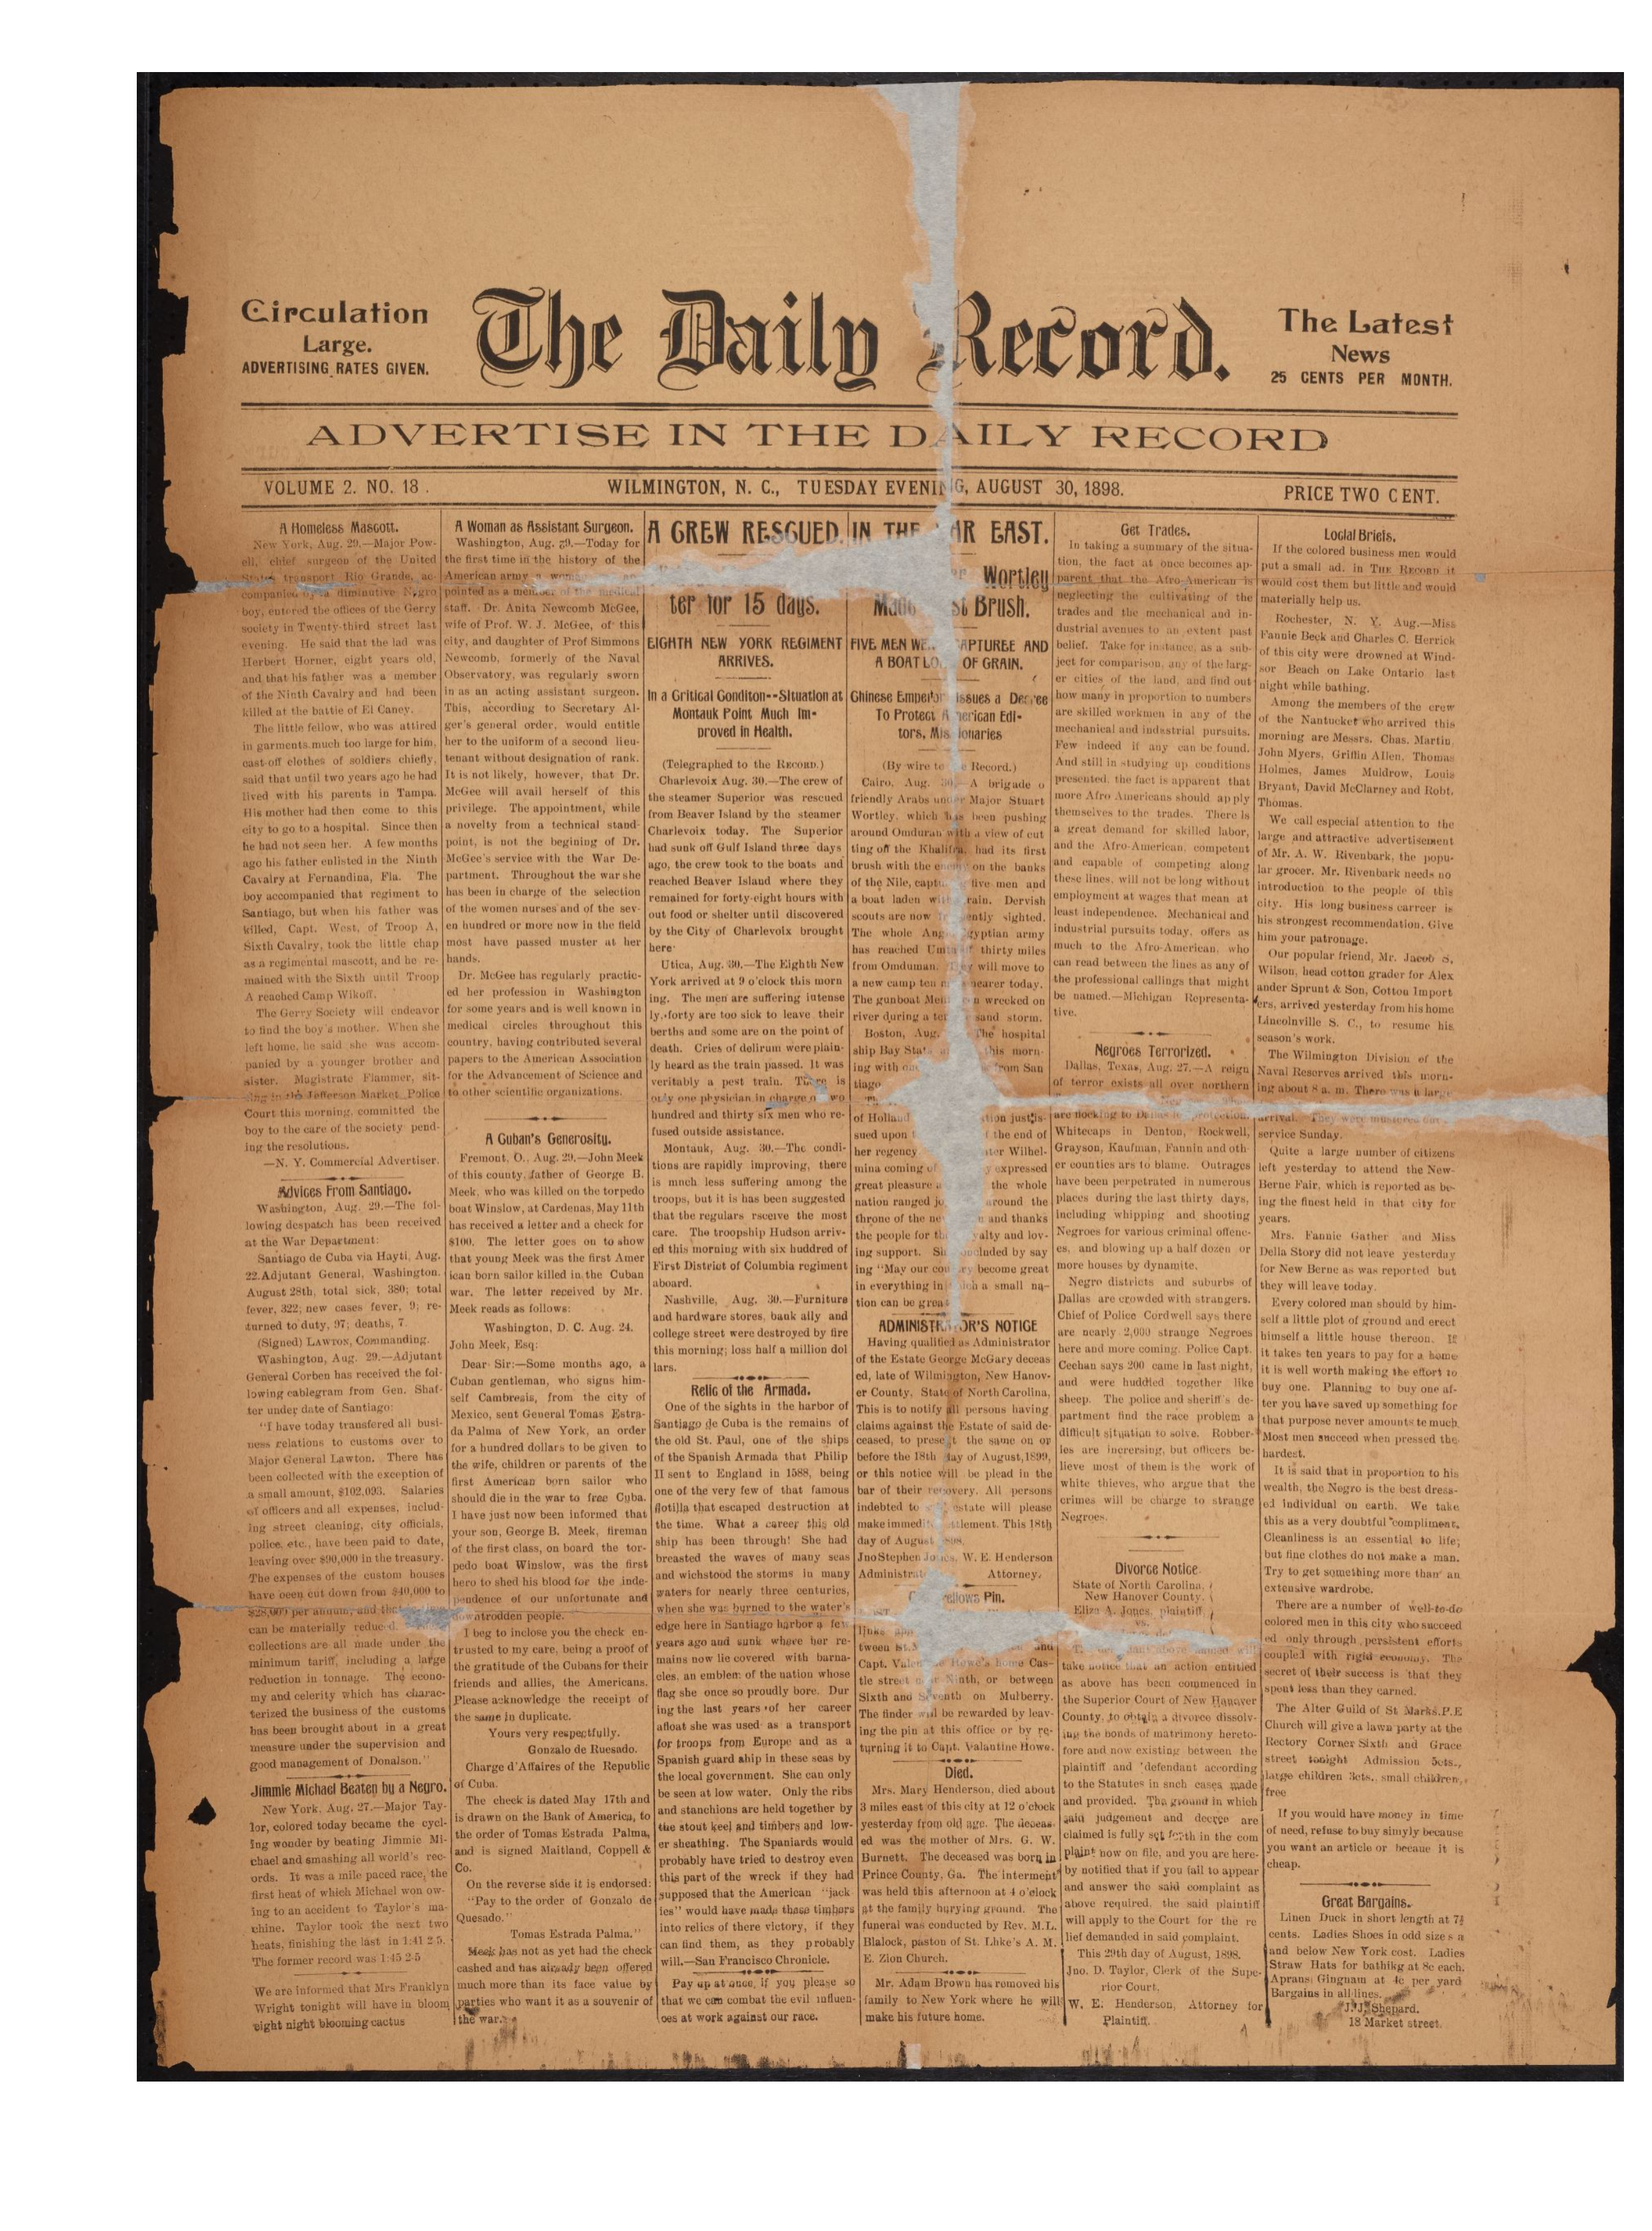  Copy of Alex Manly’s newspaper, “The Daily Record”. Credit: The Wilmington Daily Record Project 